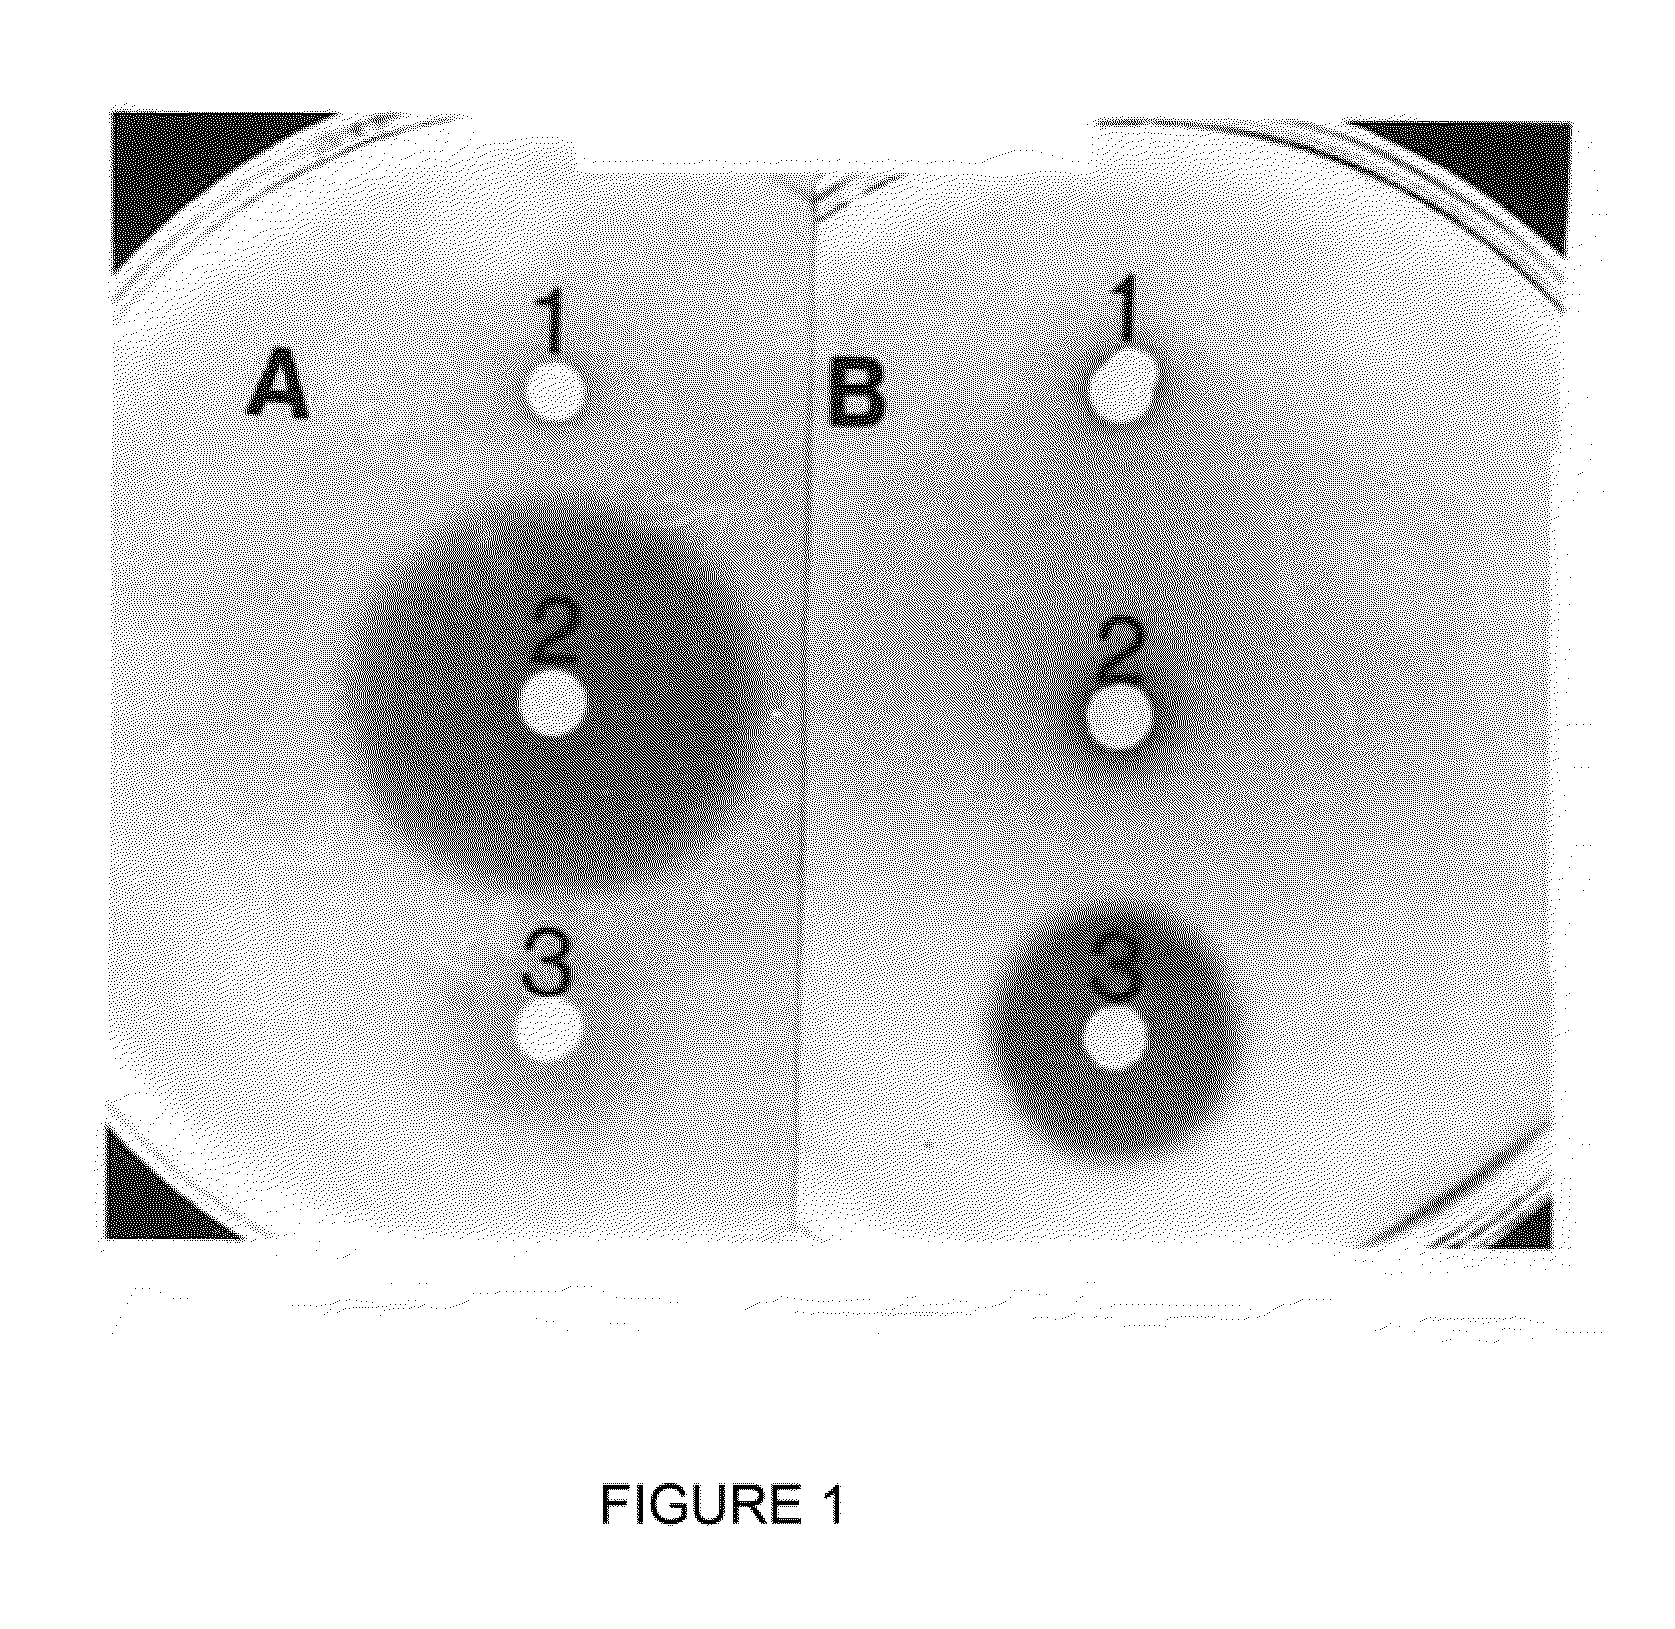 Novel Bacteriocins, Transport and Vector System and Method of Use Thereof